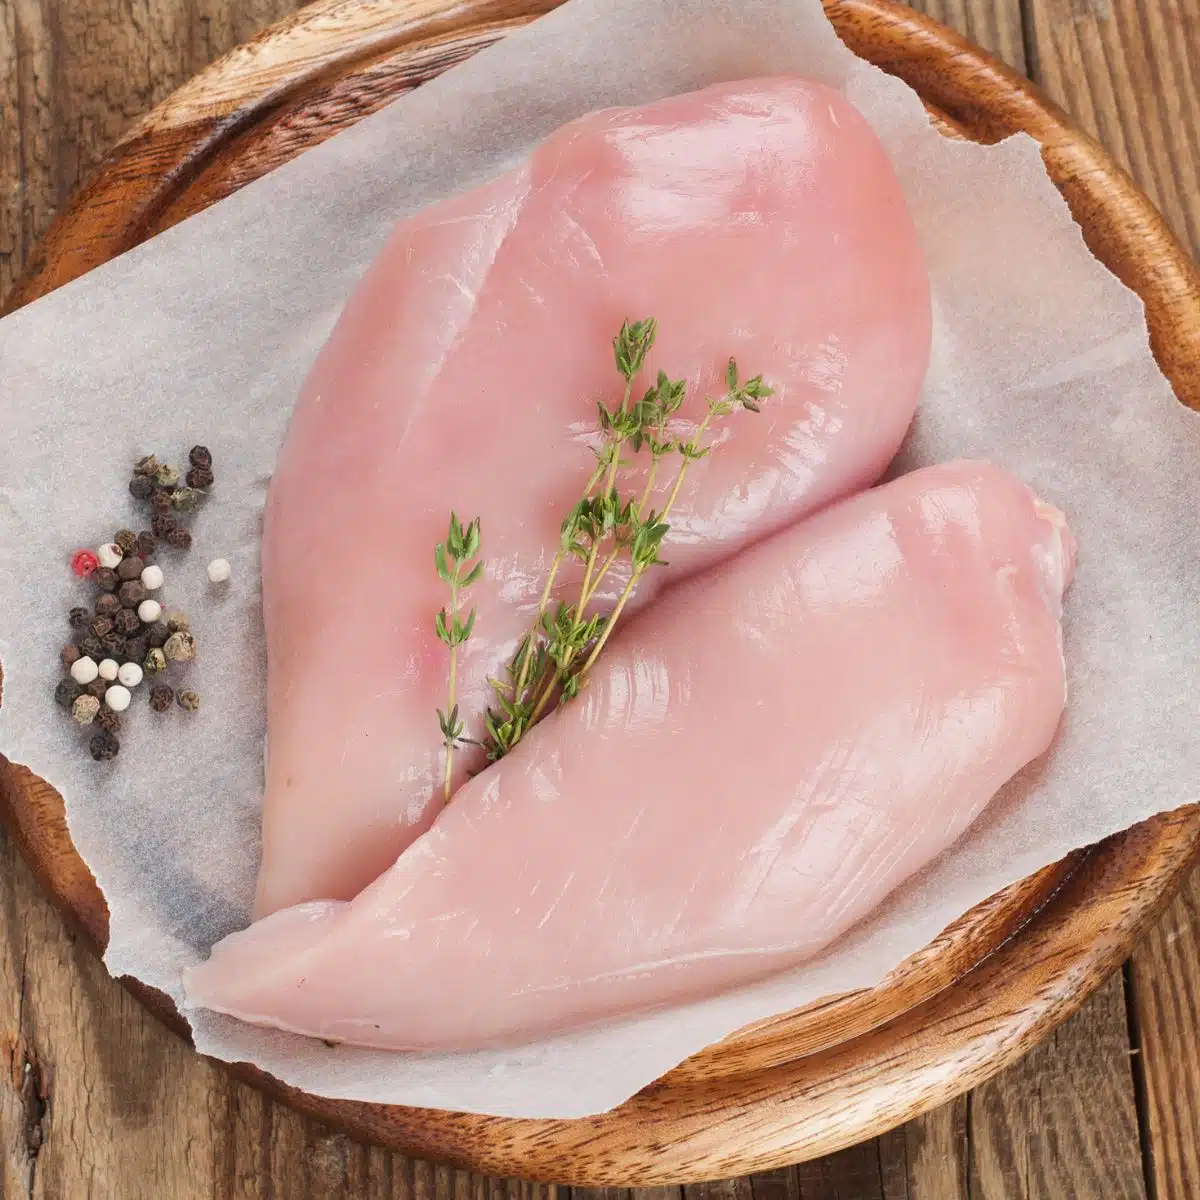 Square image showing raw chicken breasts.